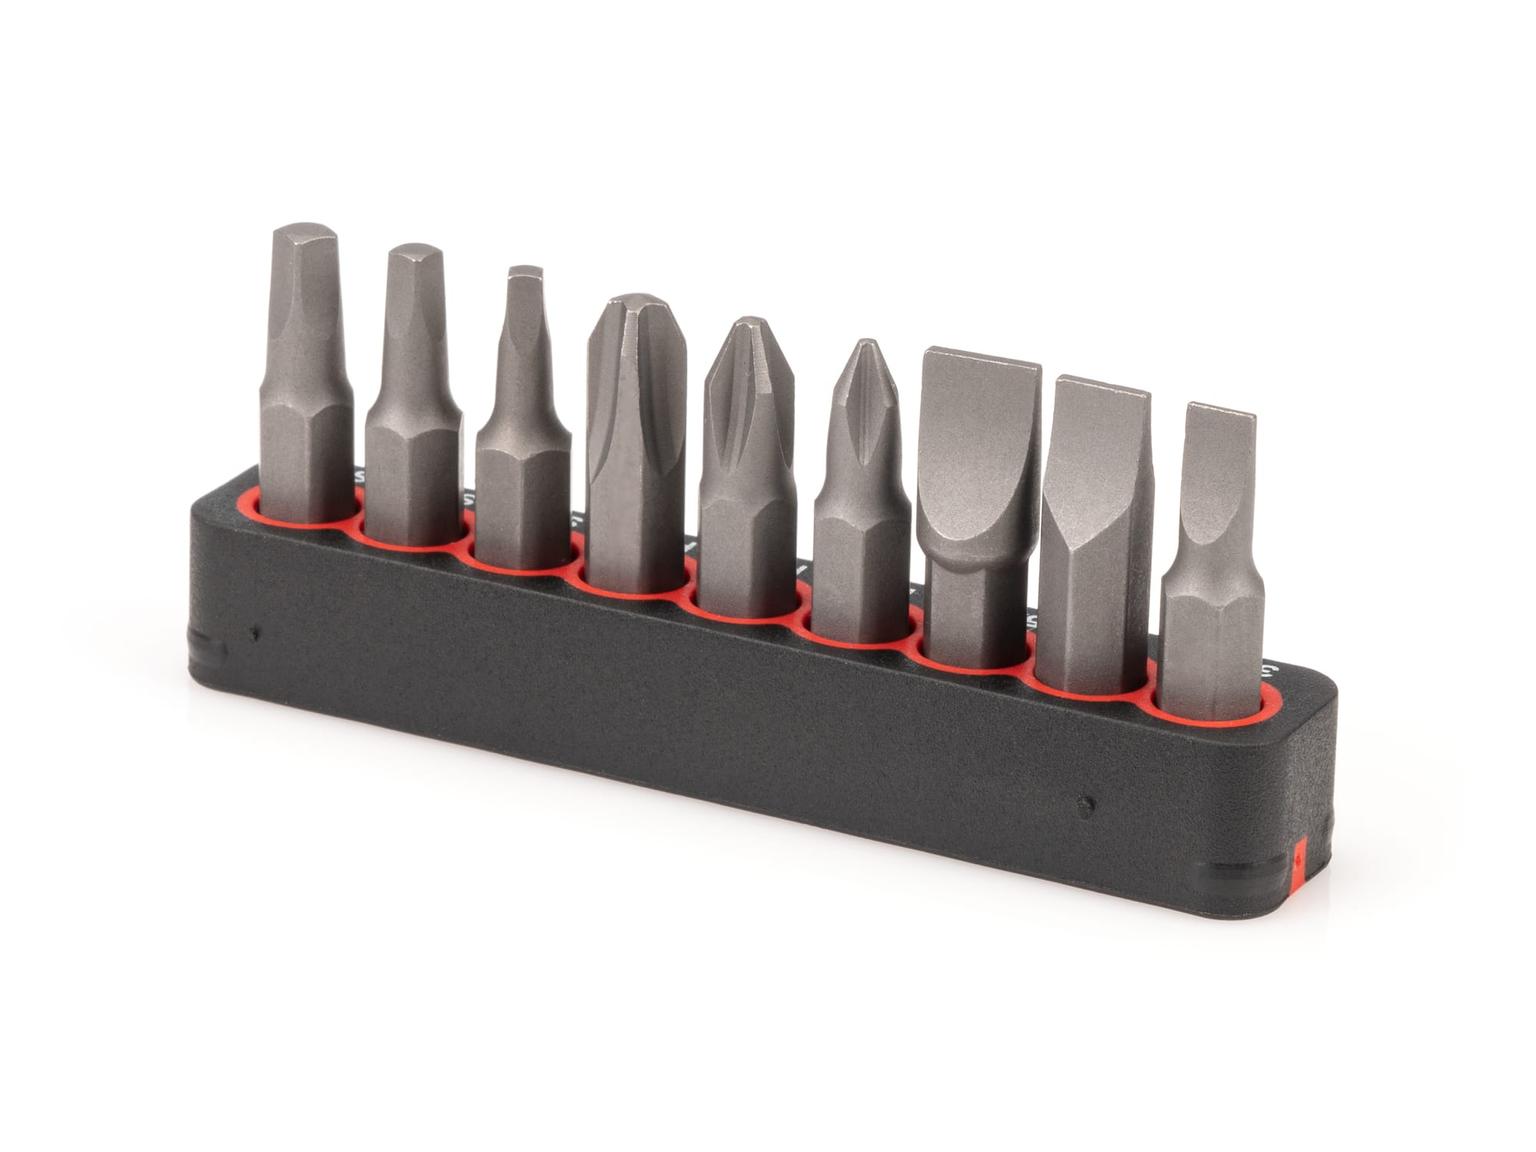 TEKTON DZZ93001-T 1/4 Inch Phillips, Slotted, Square Bit Set with Rail, 9-Piece (#1-#3, 3/16-5/16 in., S1-S3)